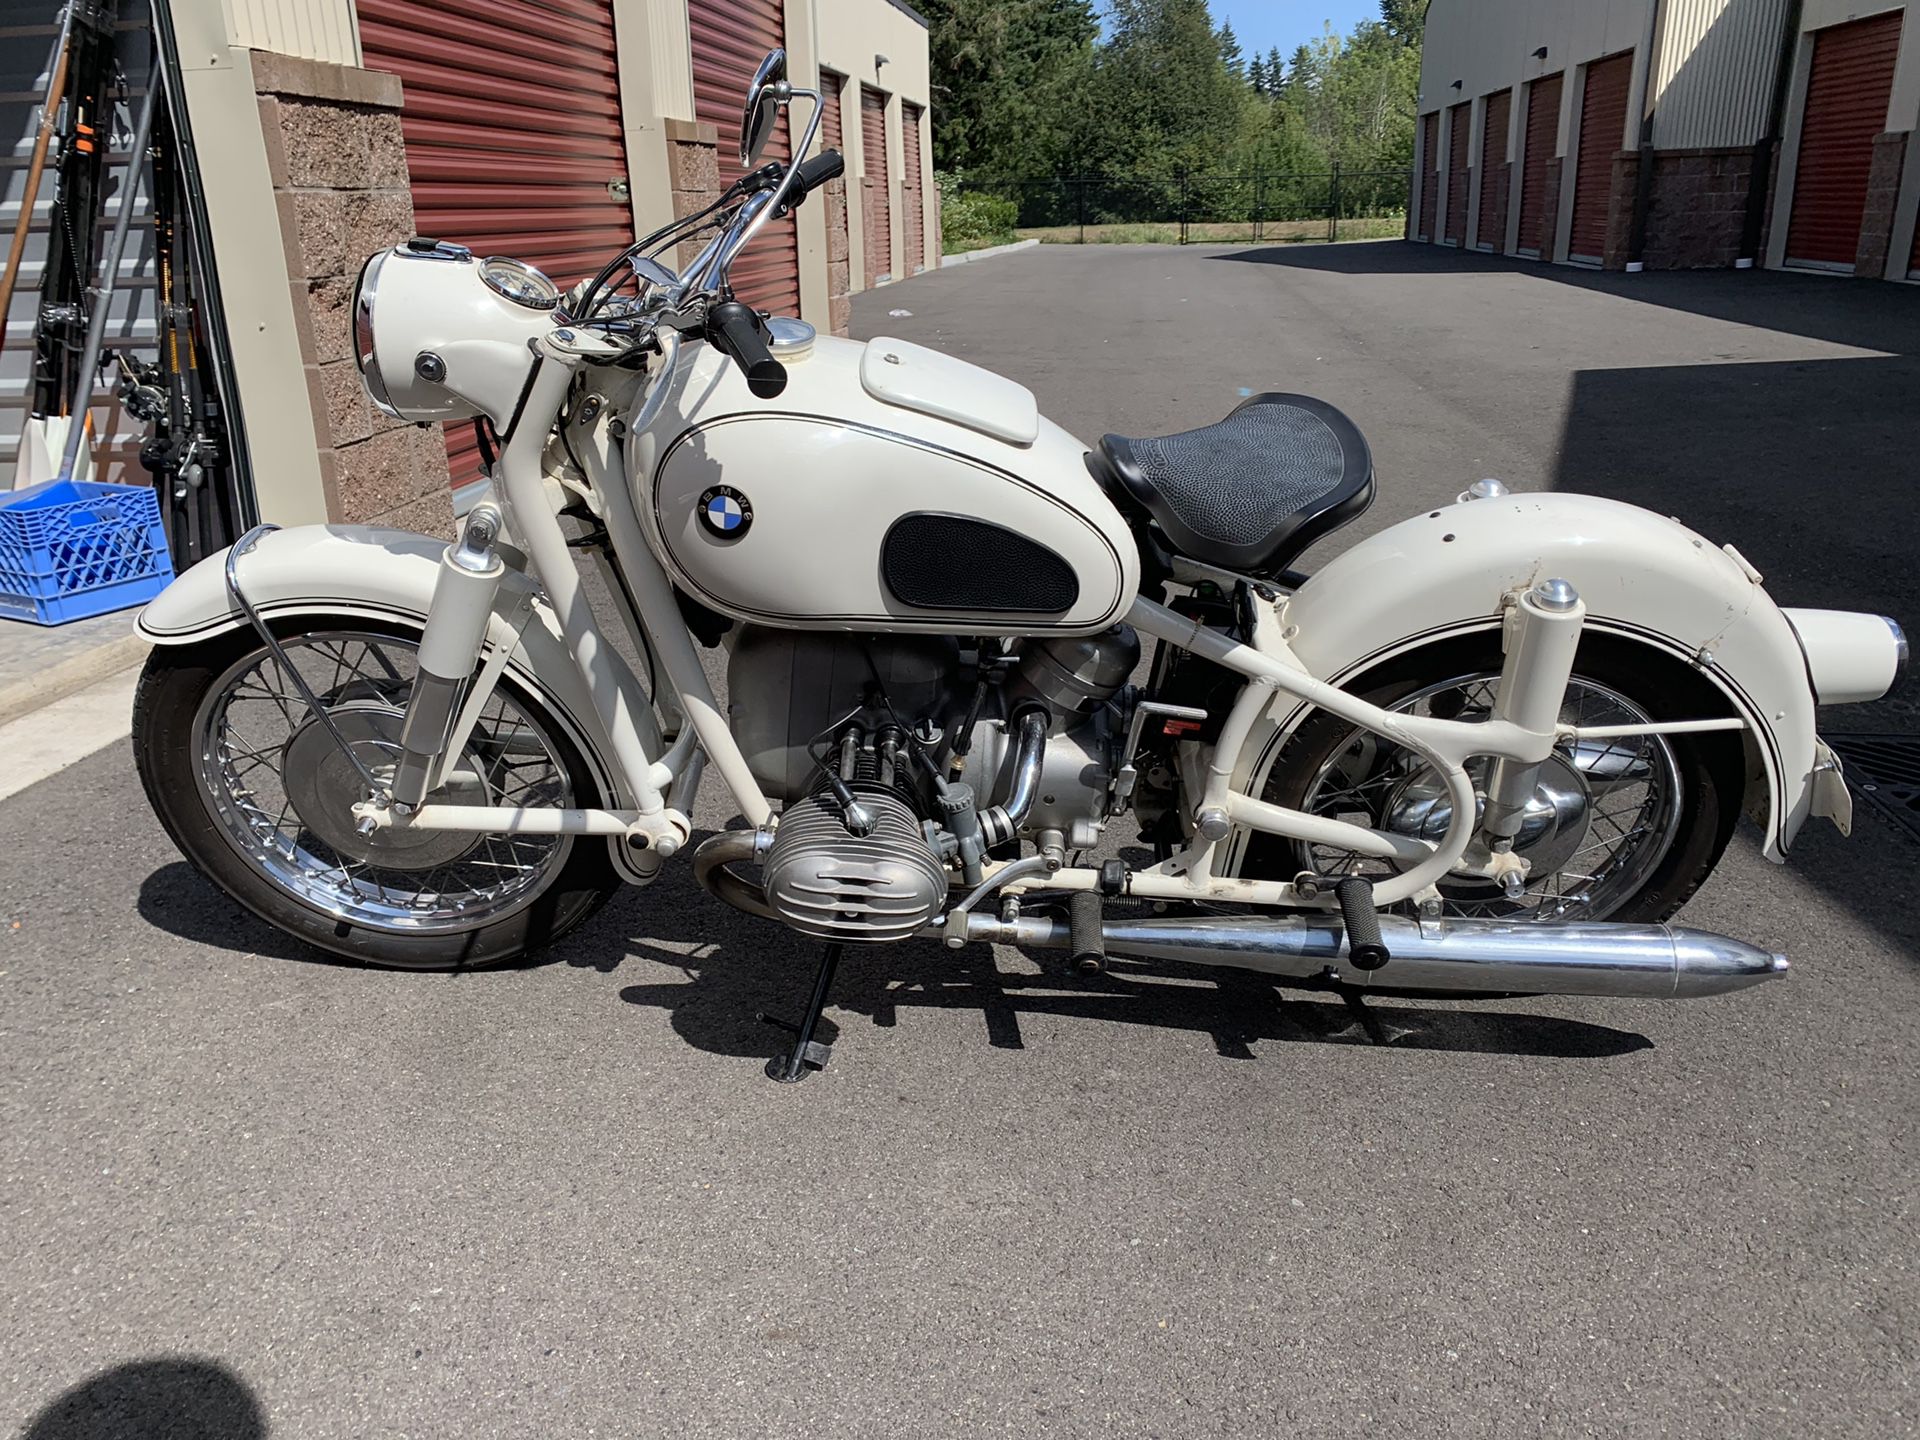 1967 BMW R60/2 motorcycle